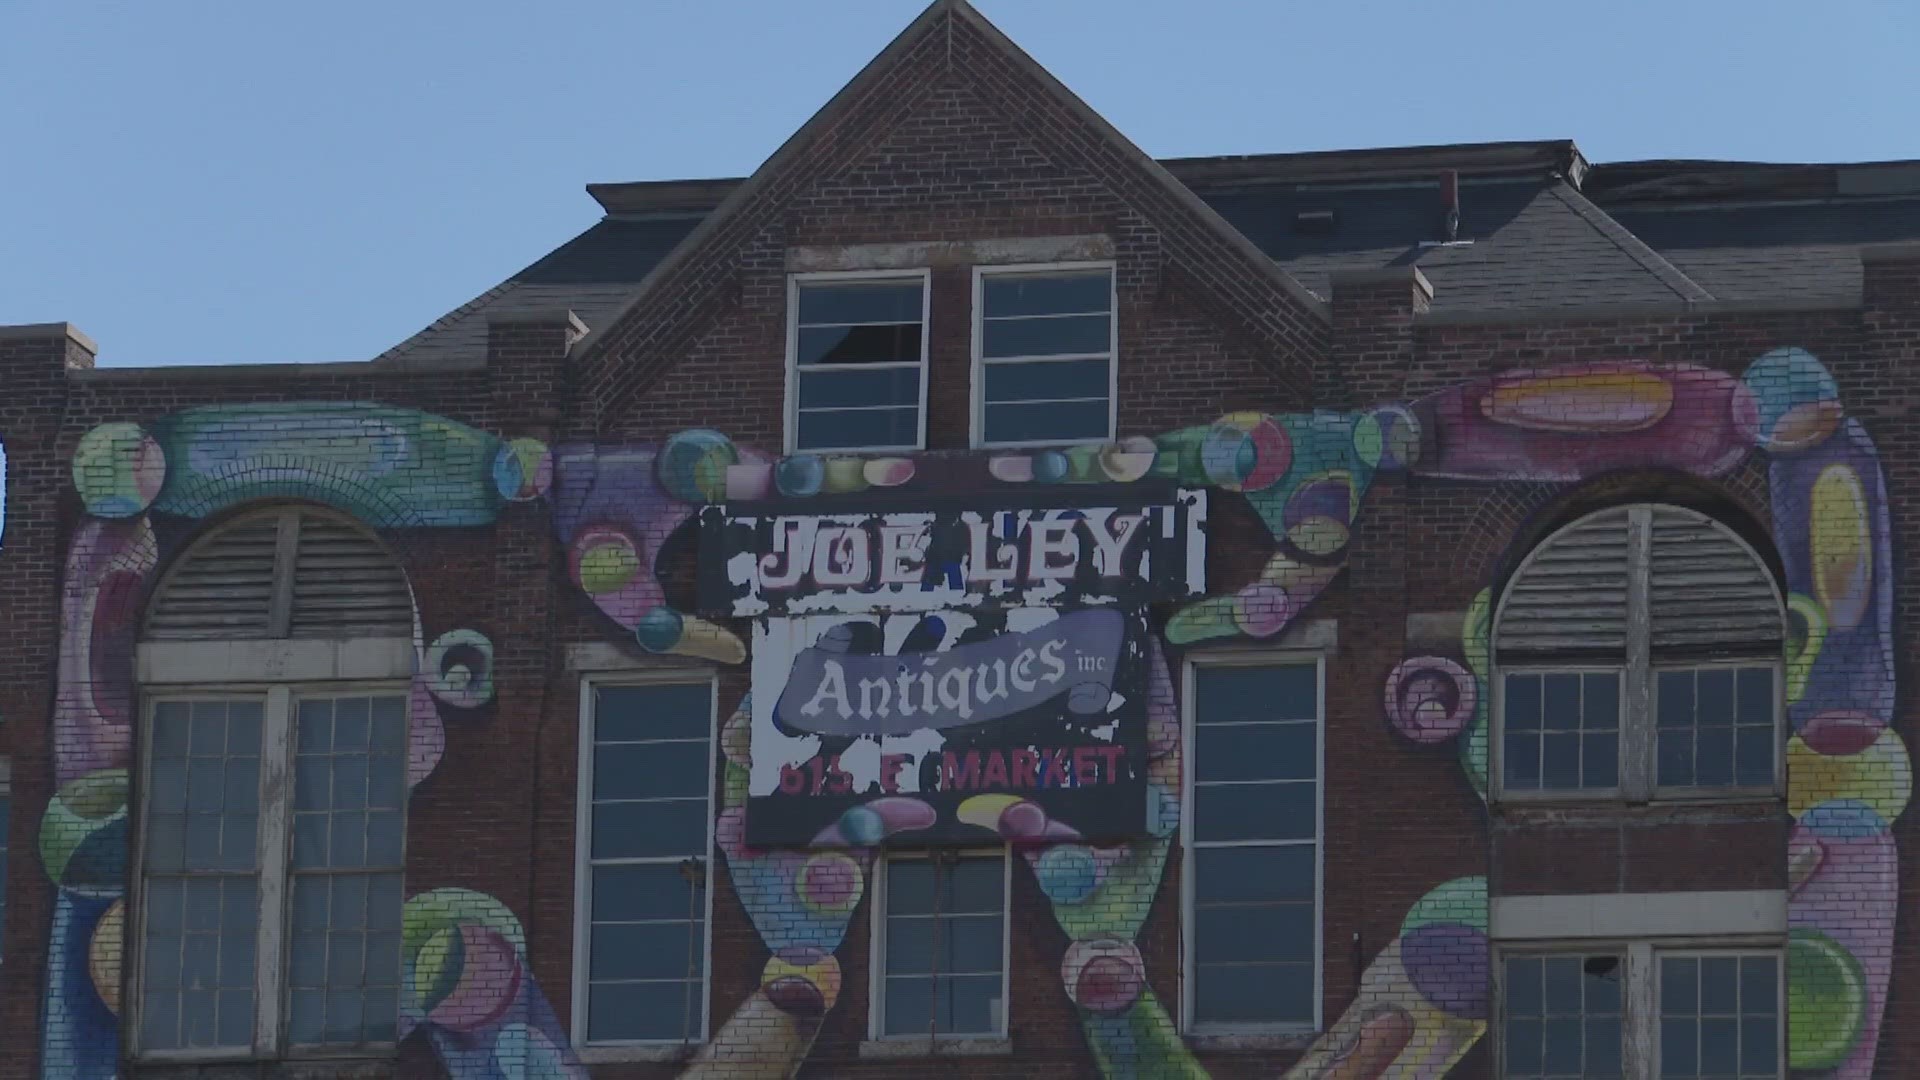 The historic Joe Ley building on East Market was built in the 1800s and housed Joe Ley antiques for 50 years.